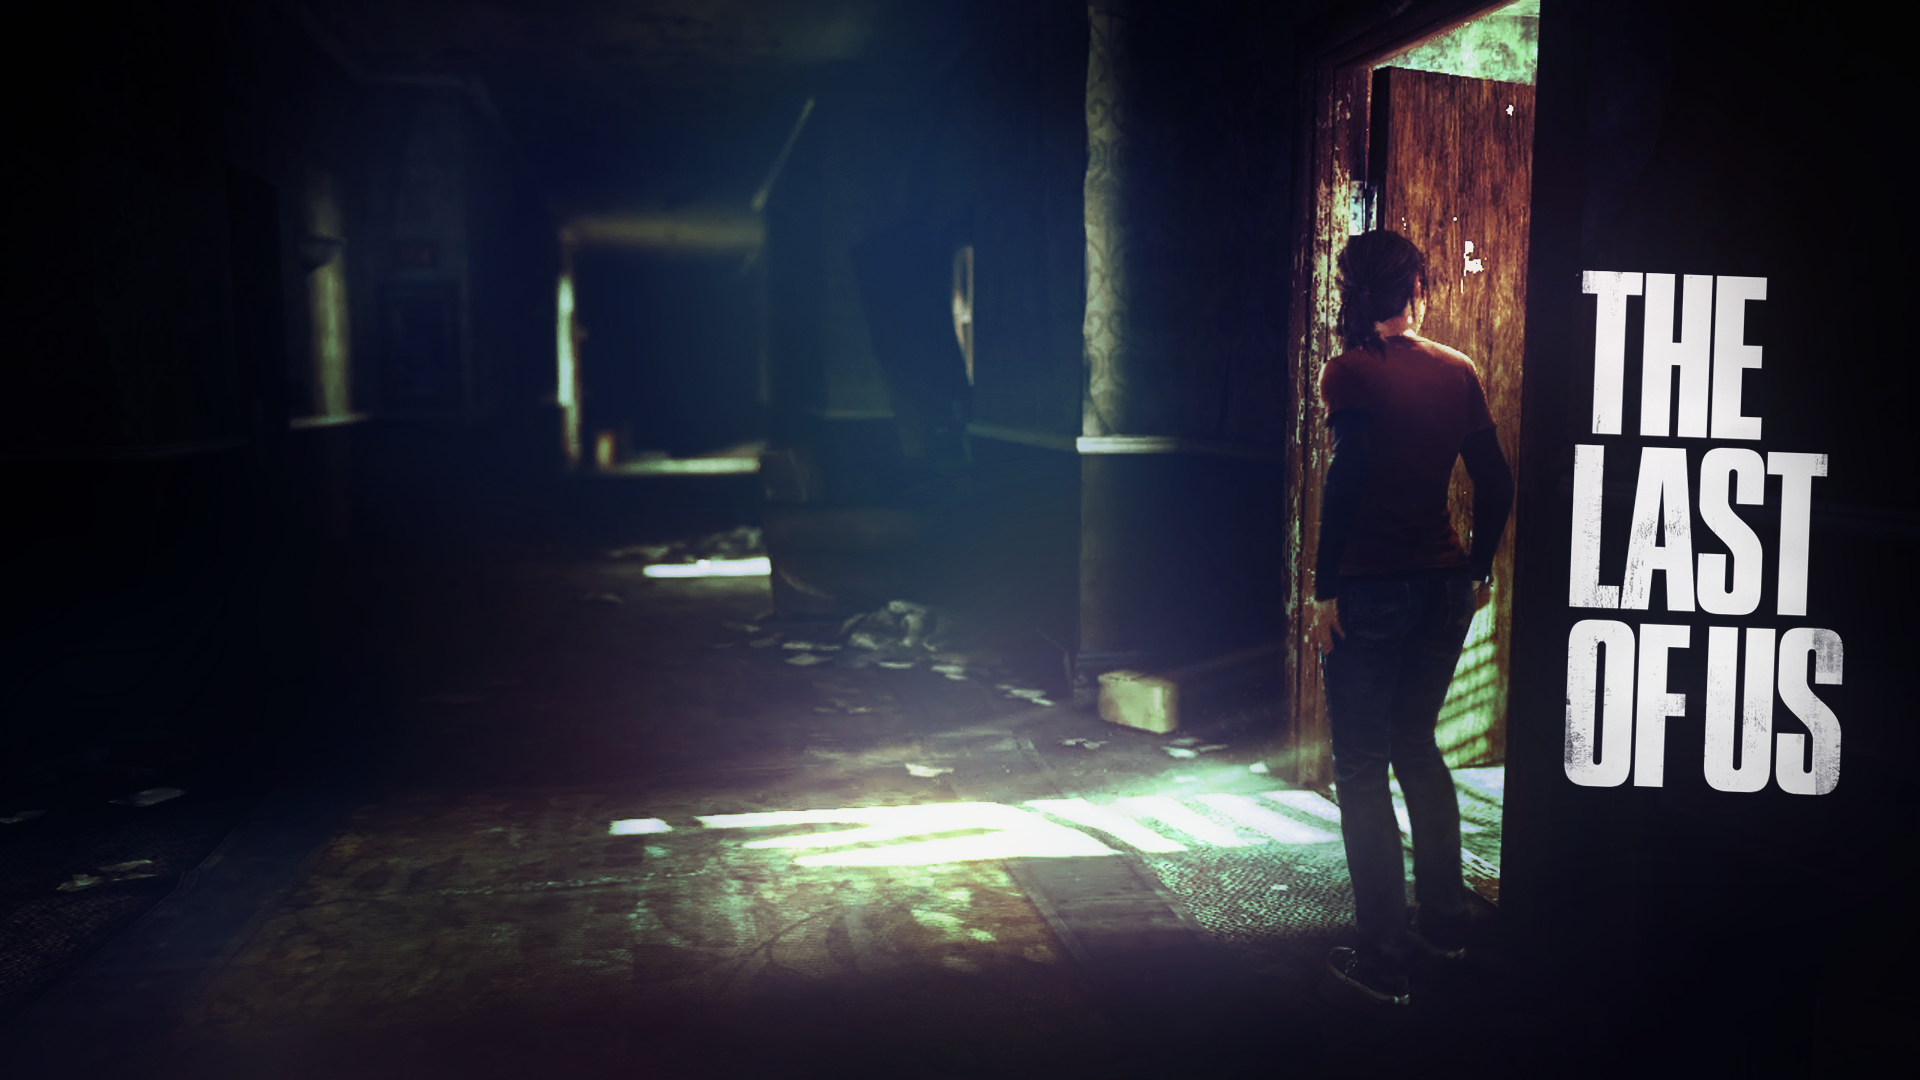 The Last of us : loneliness | The best wallpapers collection for ...